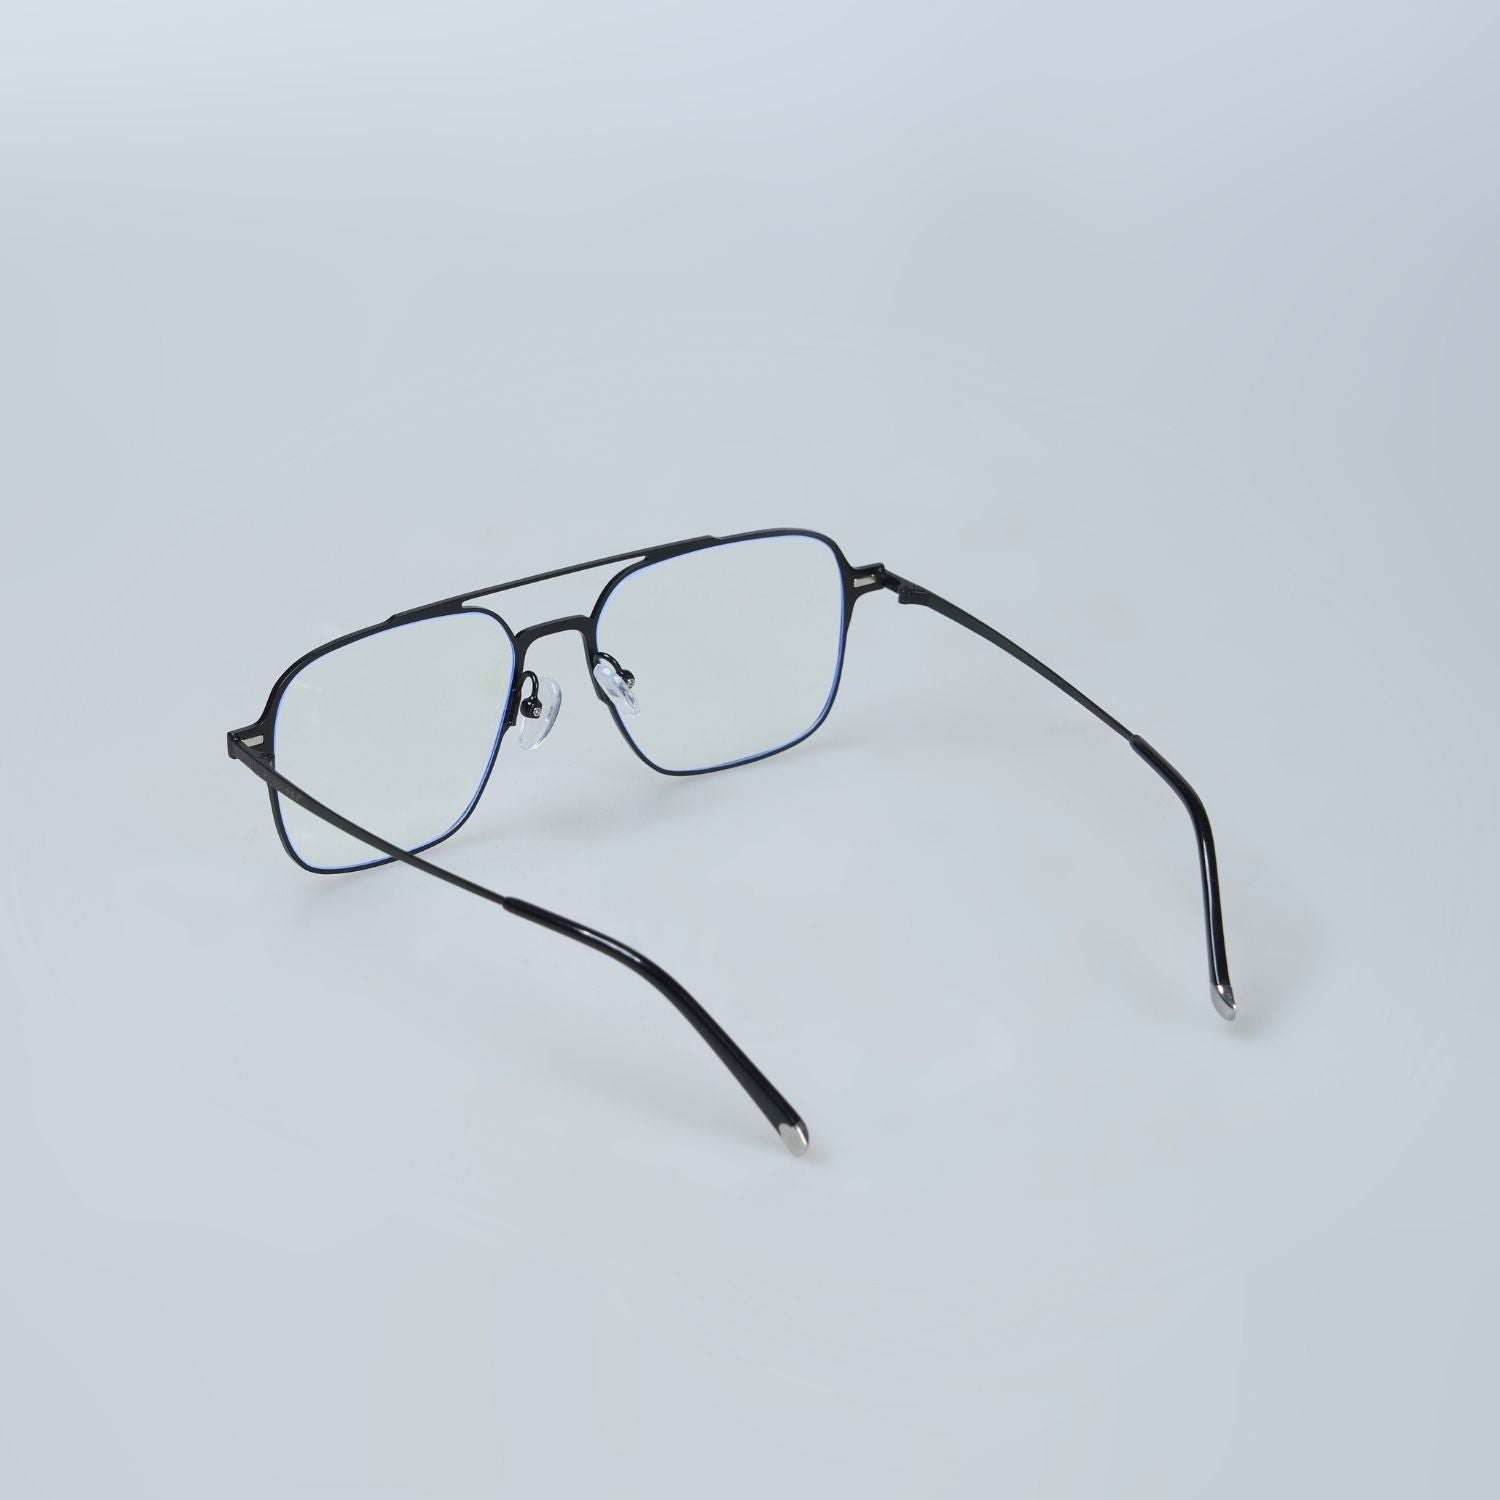 Day night changeable lens eyeshade with detachable clips for men and women, product image.